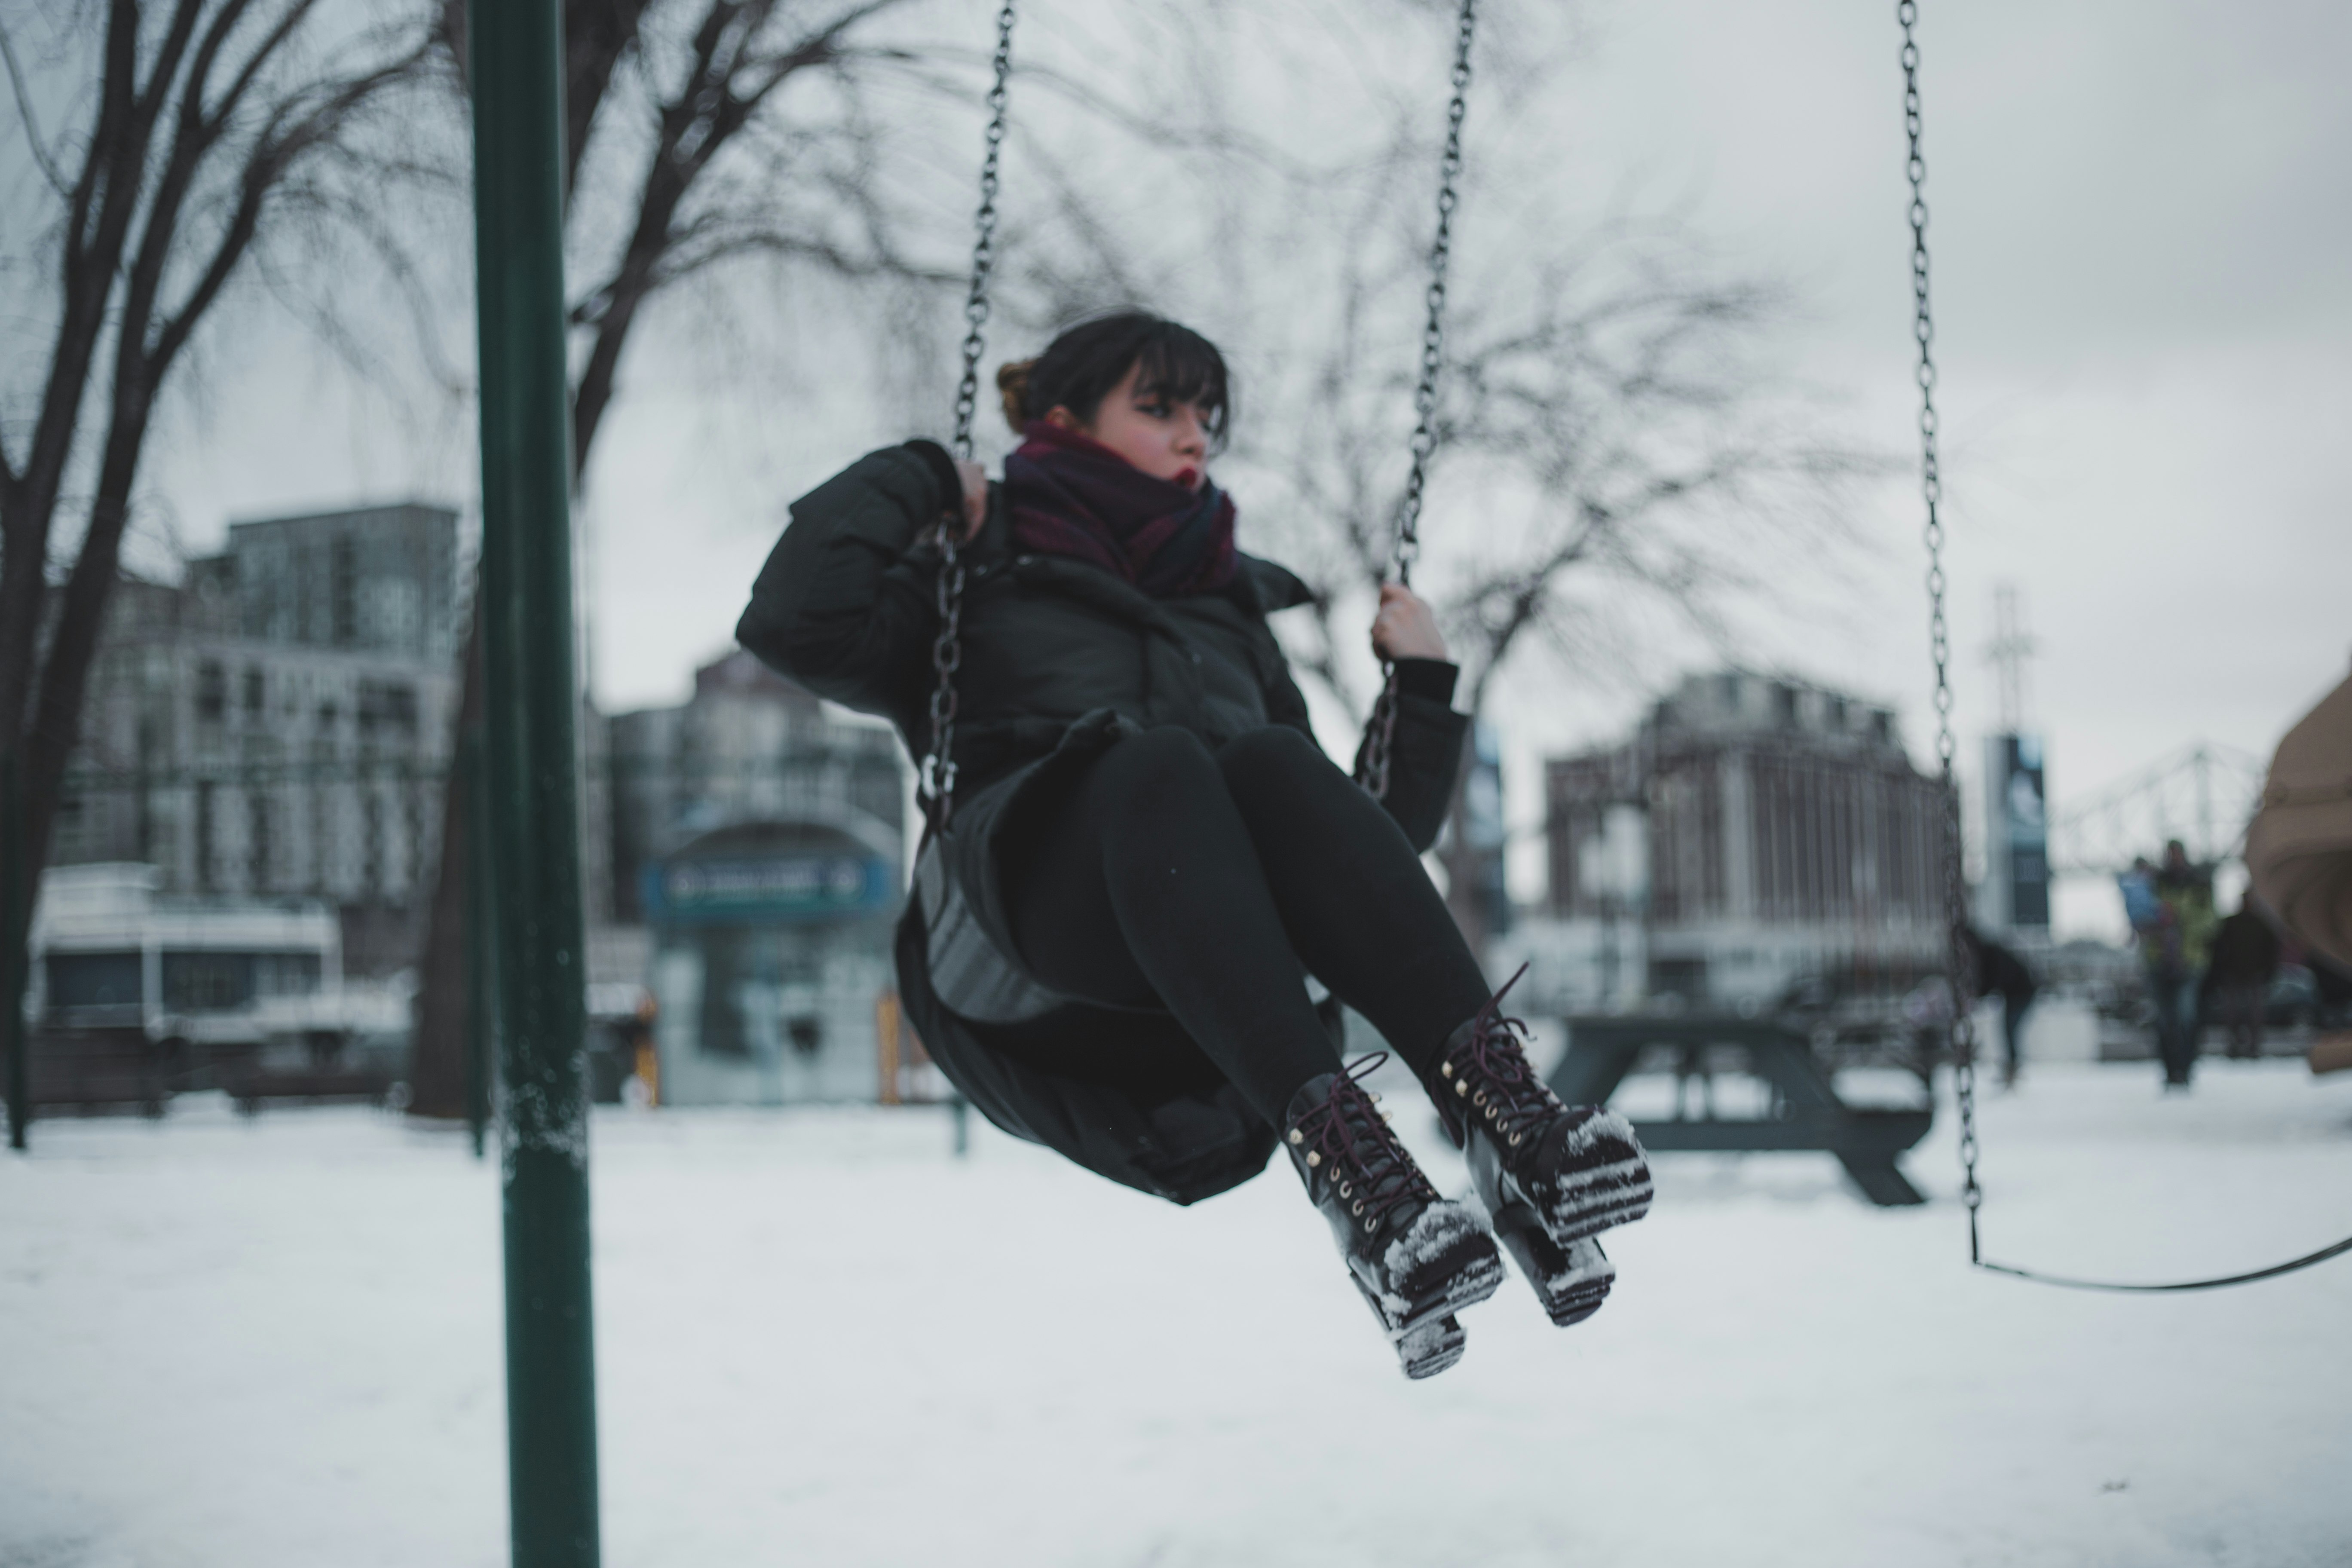 shallow focus photo of woman riding swing